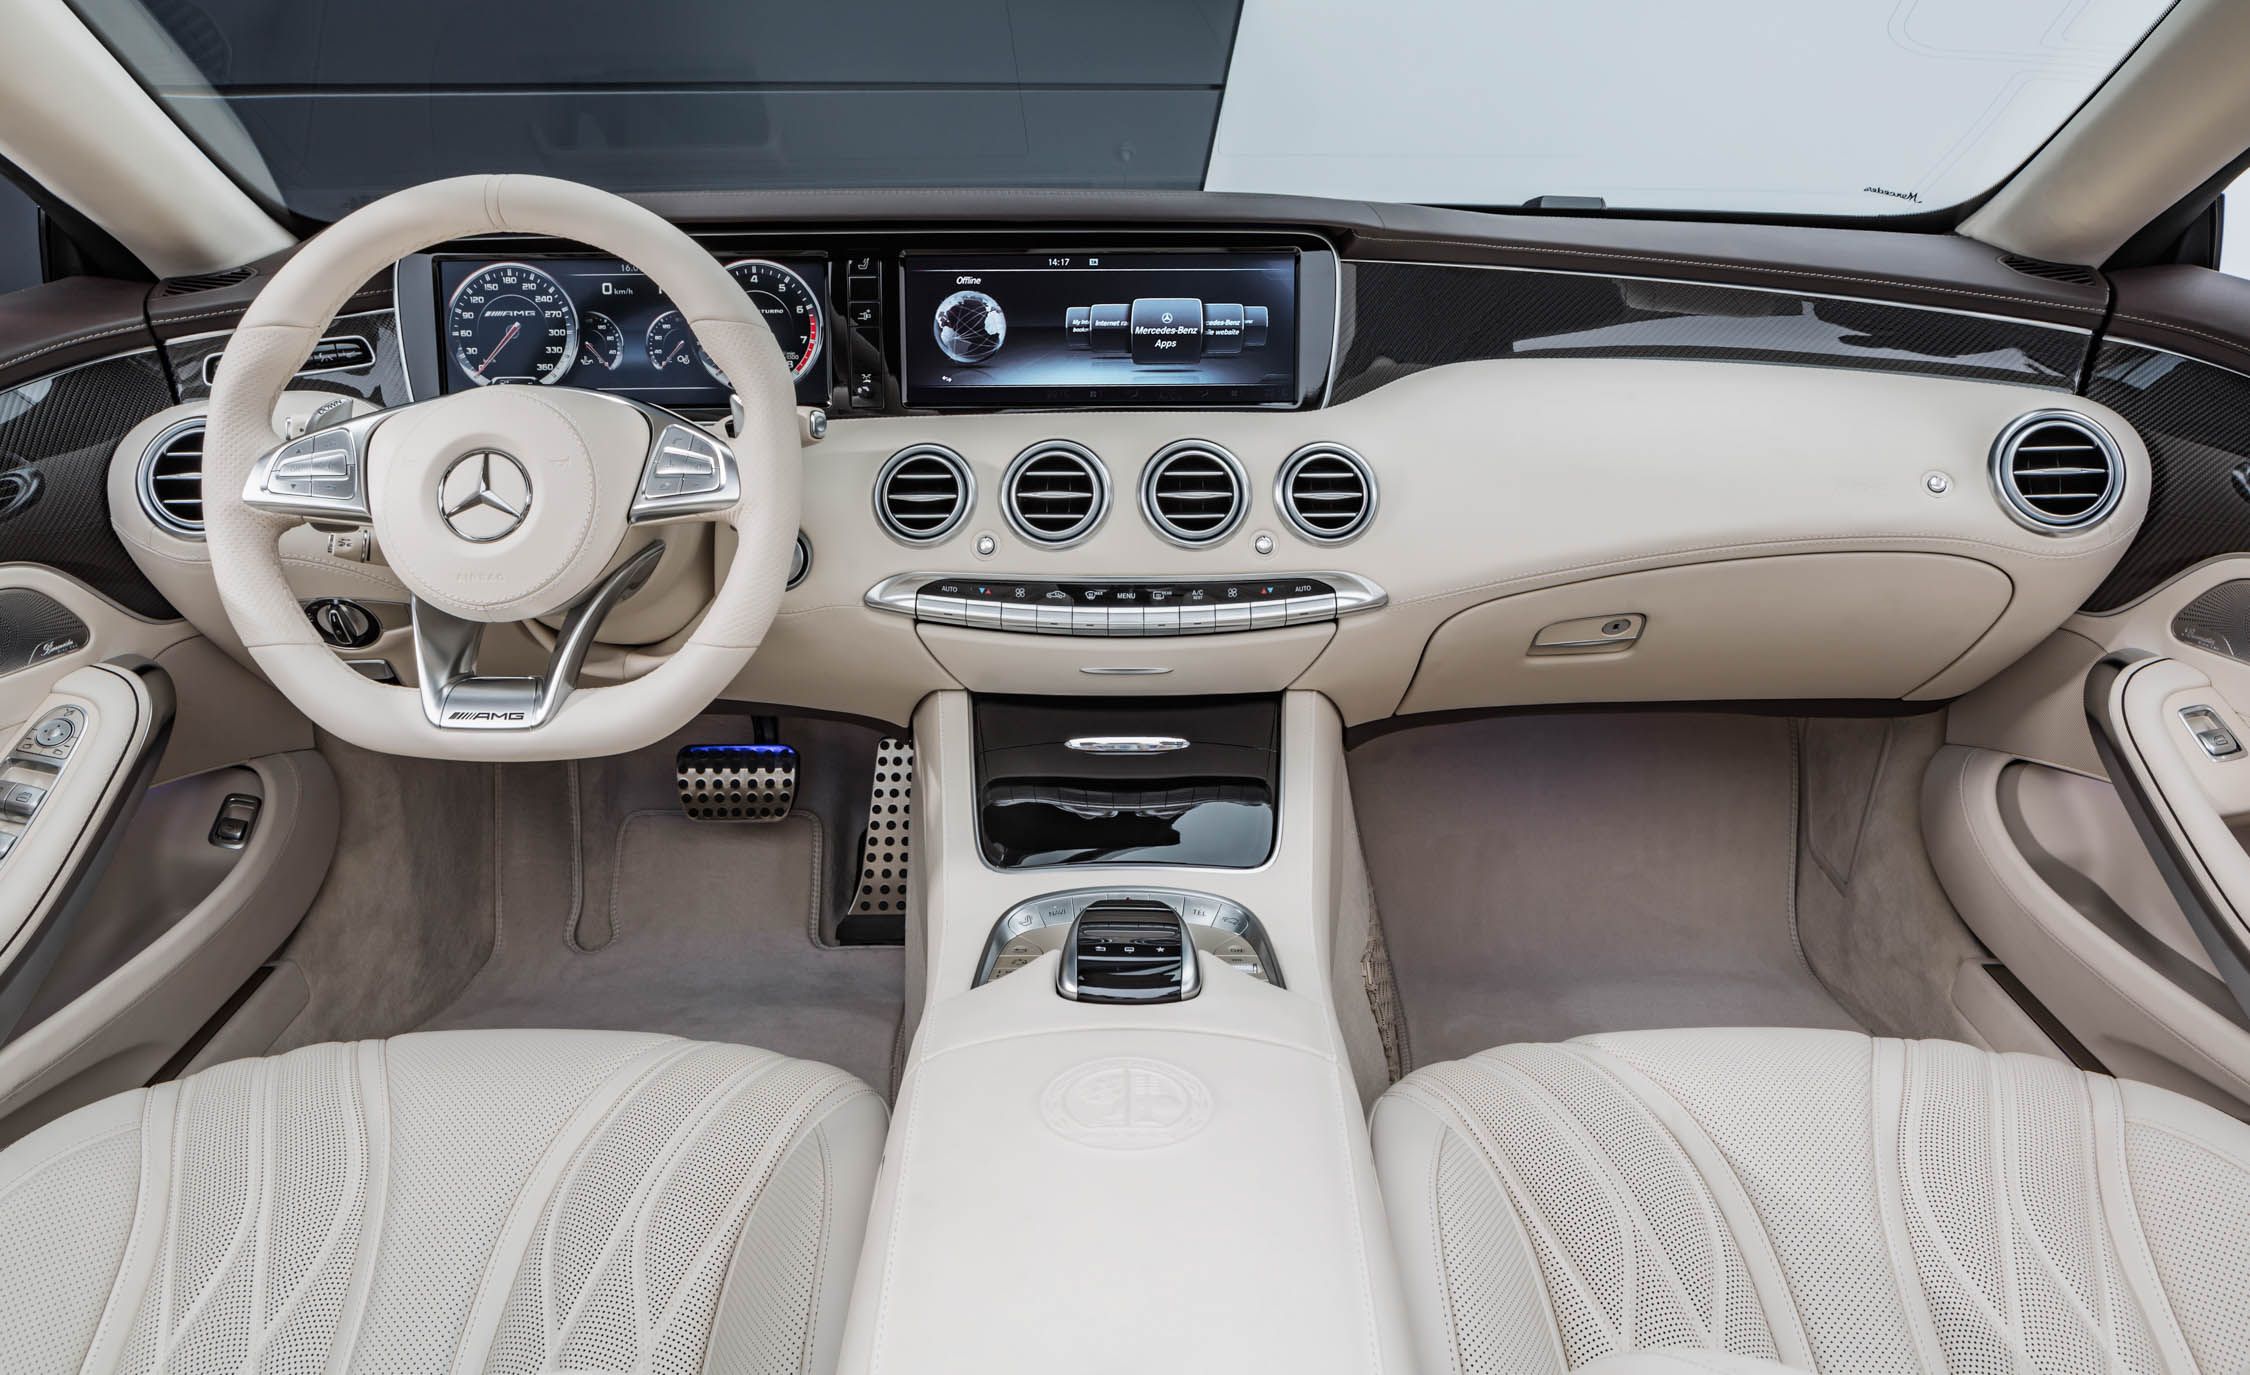 2017 Mercedes Amg S65 Cabriolet Interior (View 6 of 15)